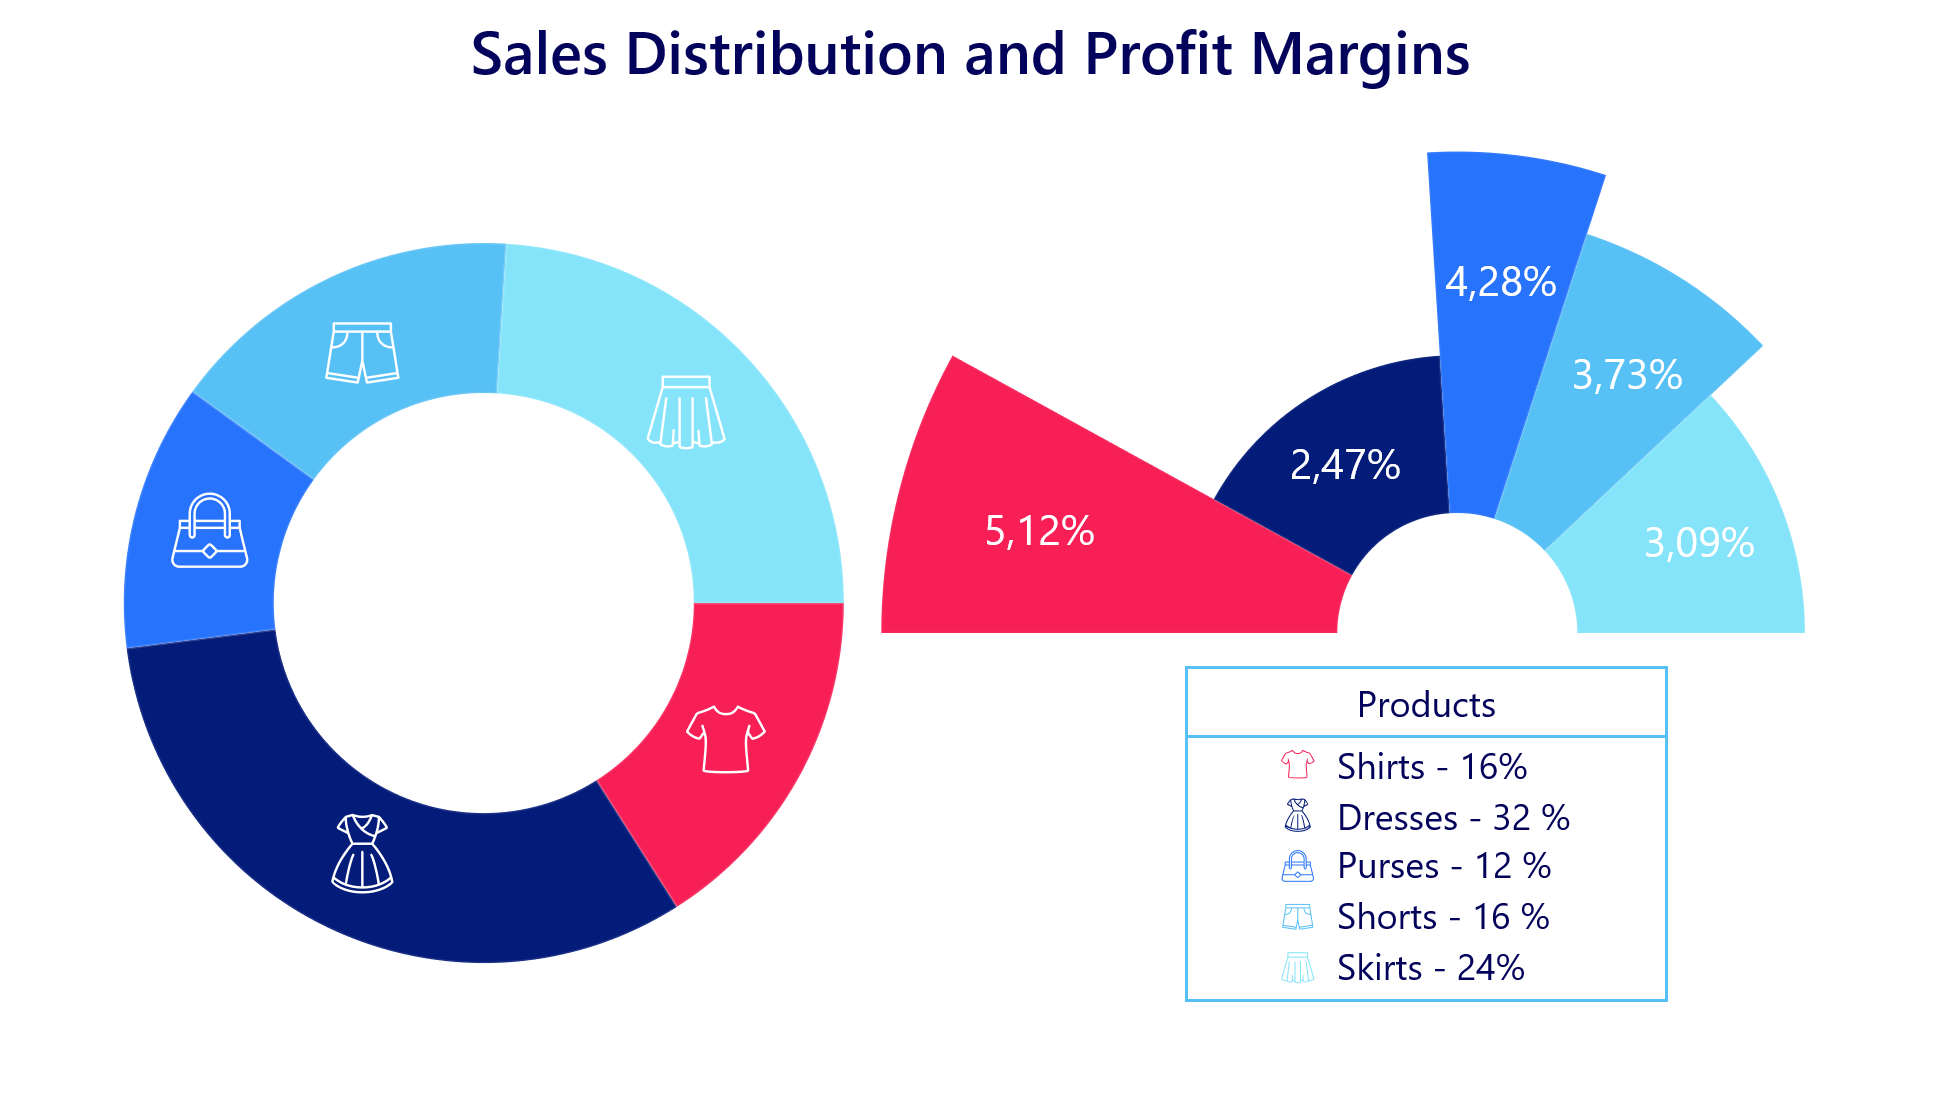 Data representation in pie/donut chart with variable slice configuration possibilities and optional legend